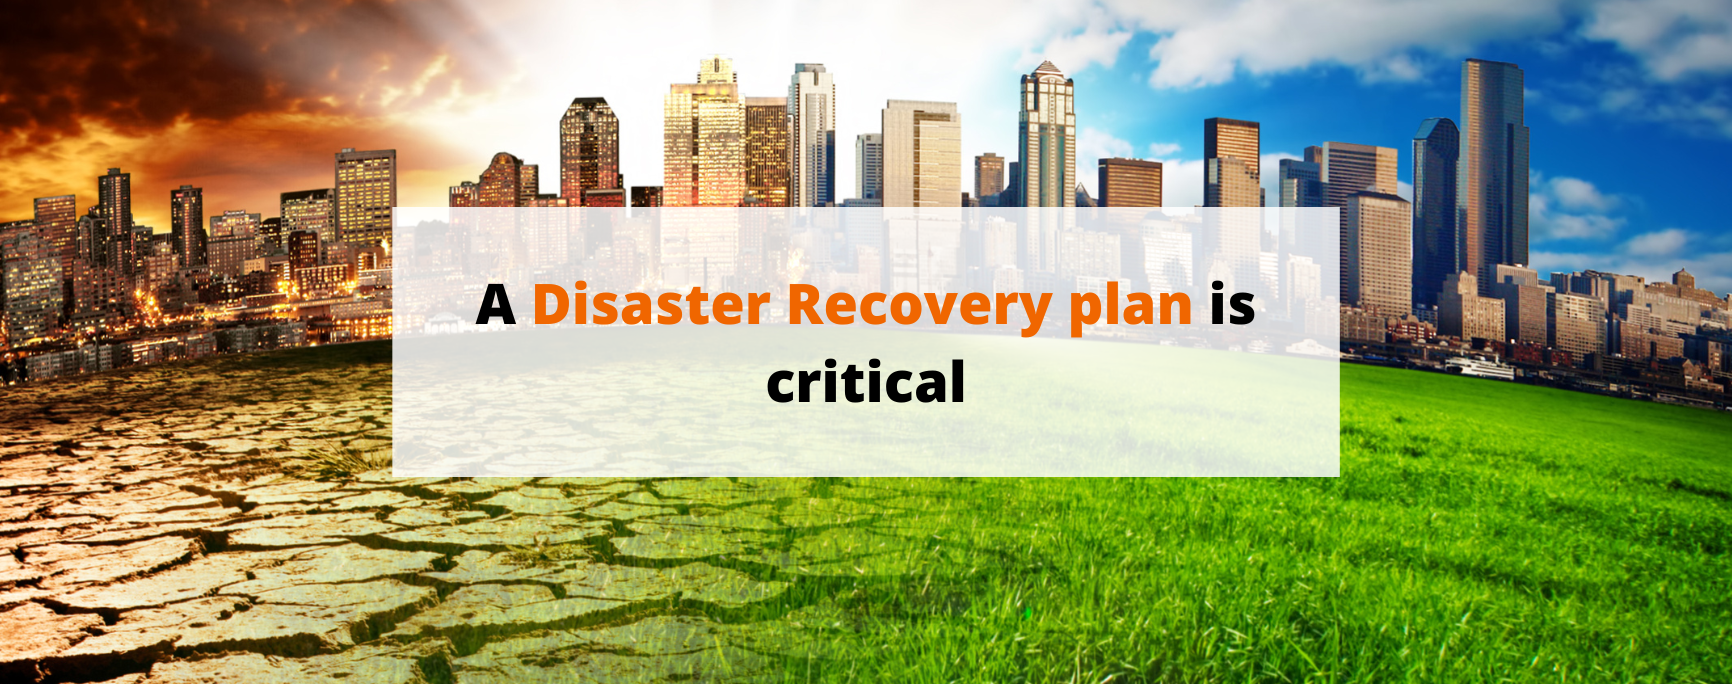 Criticality of a Disaster Recovery Plan (DRP)